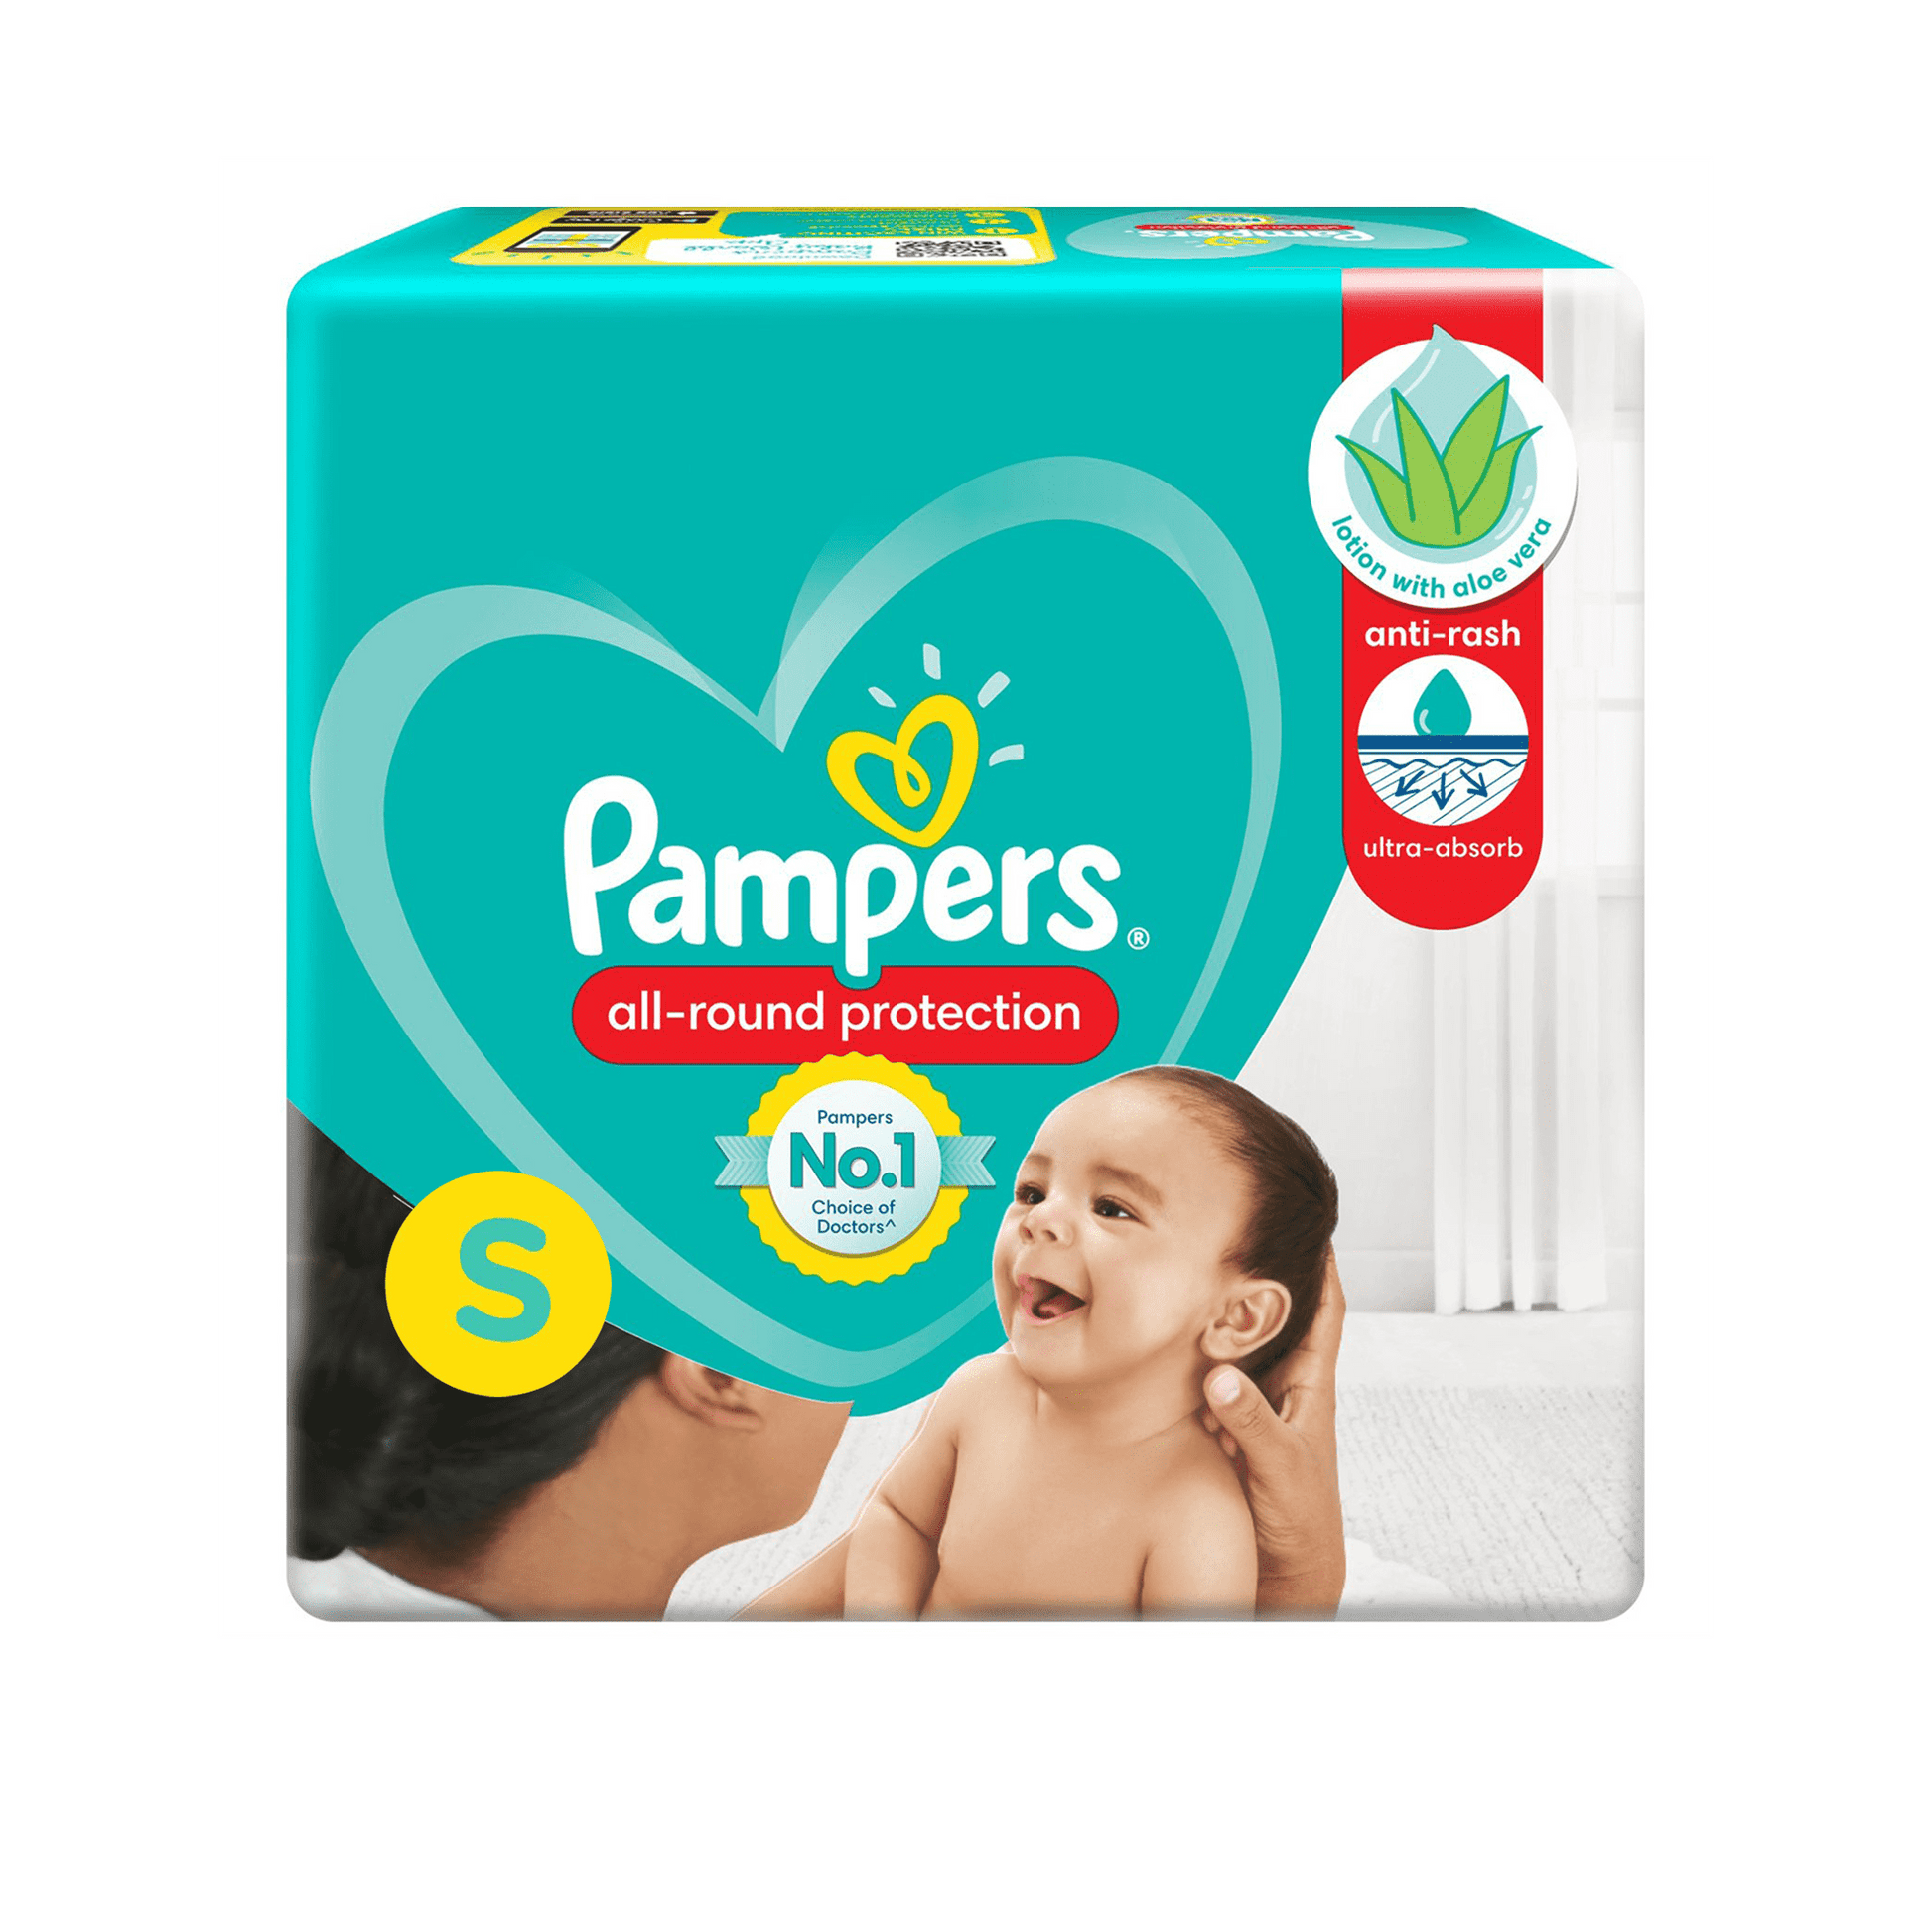 Pampers All Round Protection Diaper Pants, Size-S.